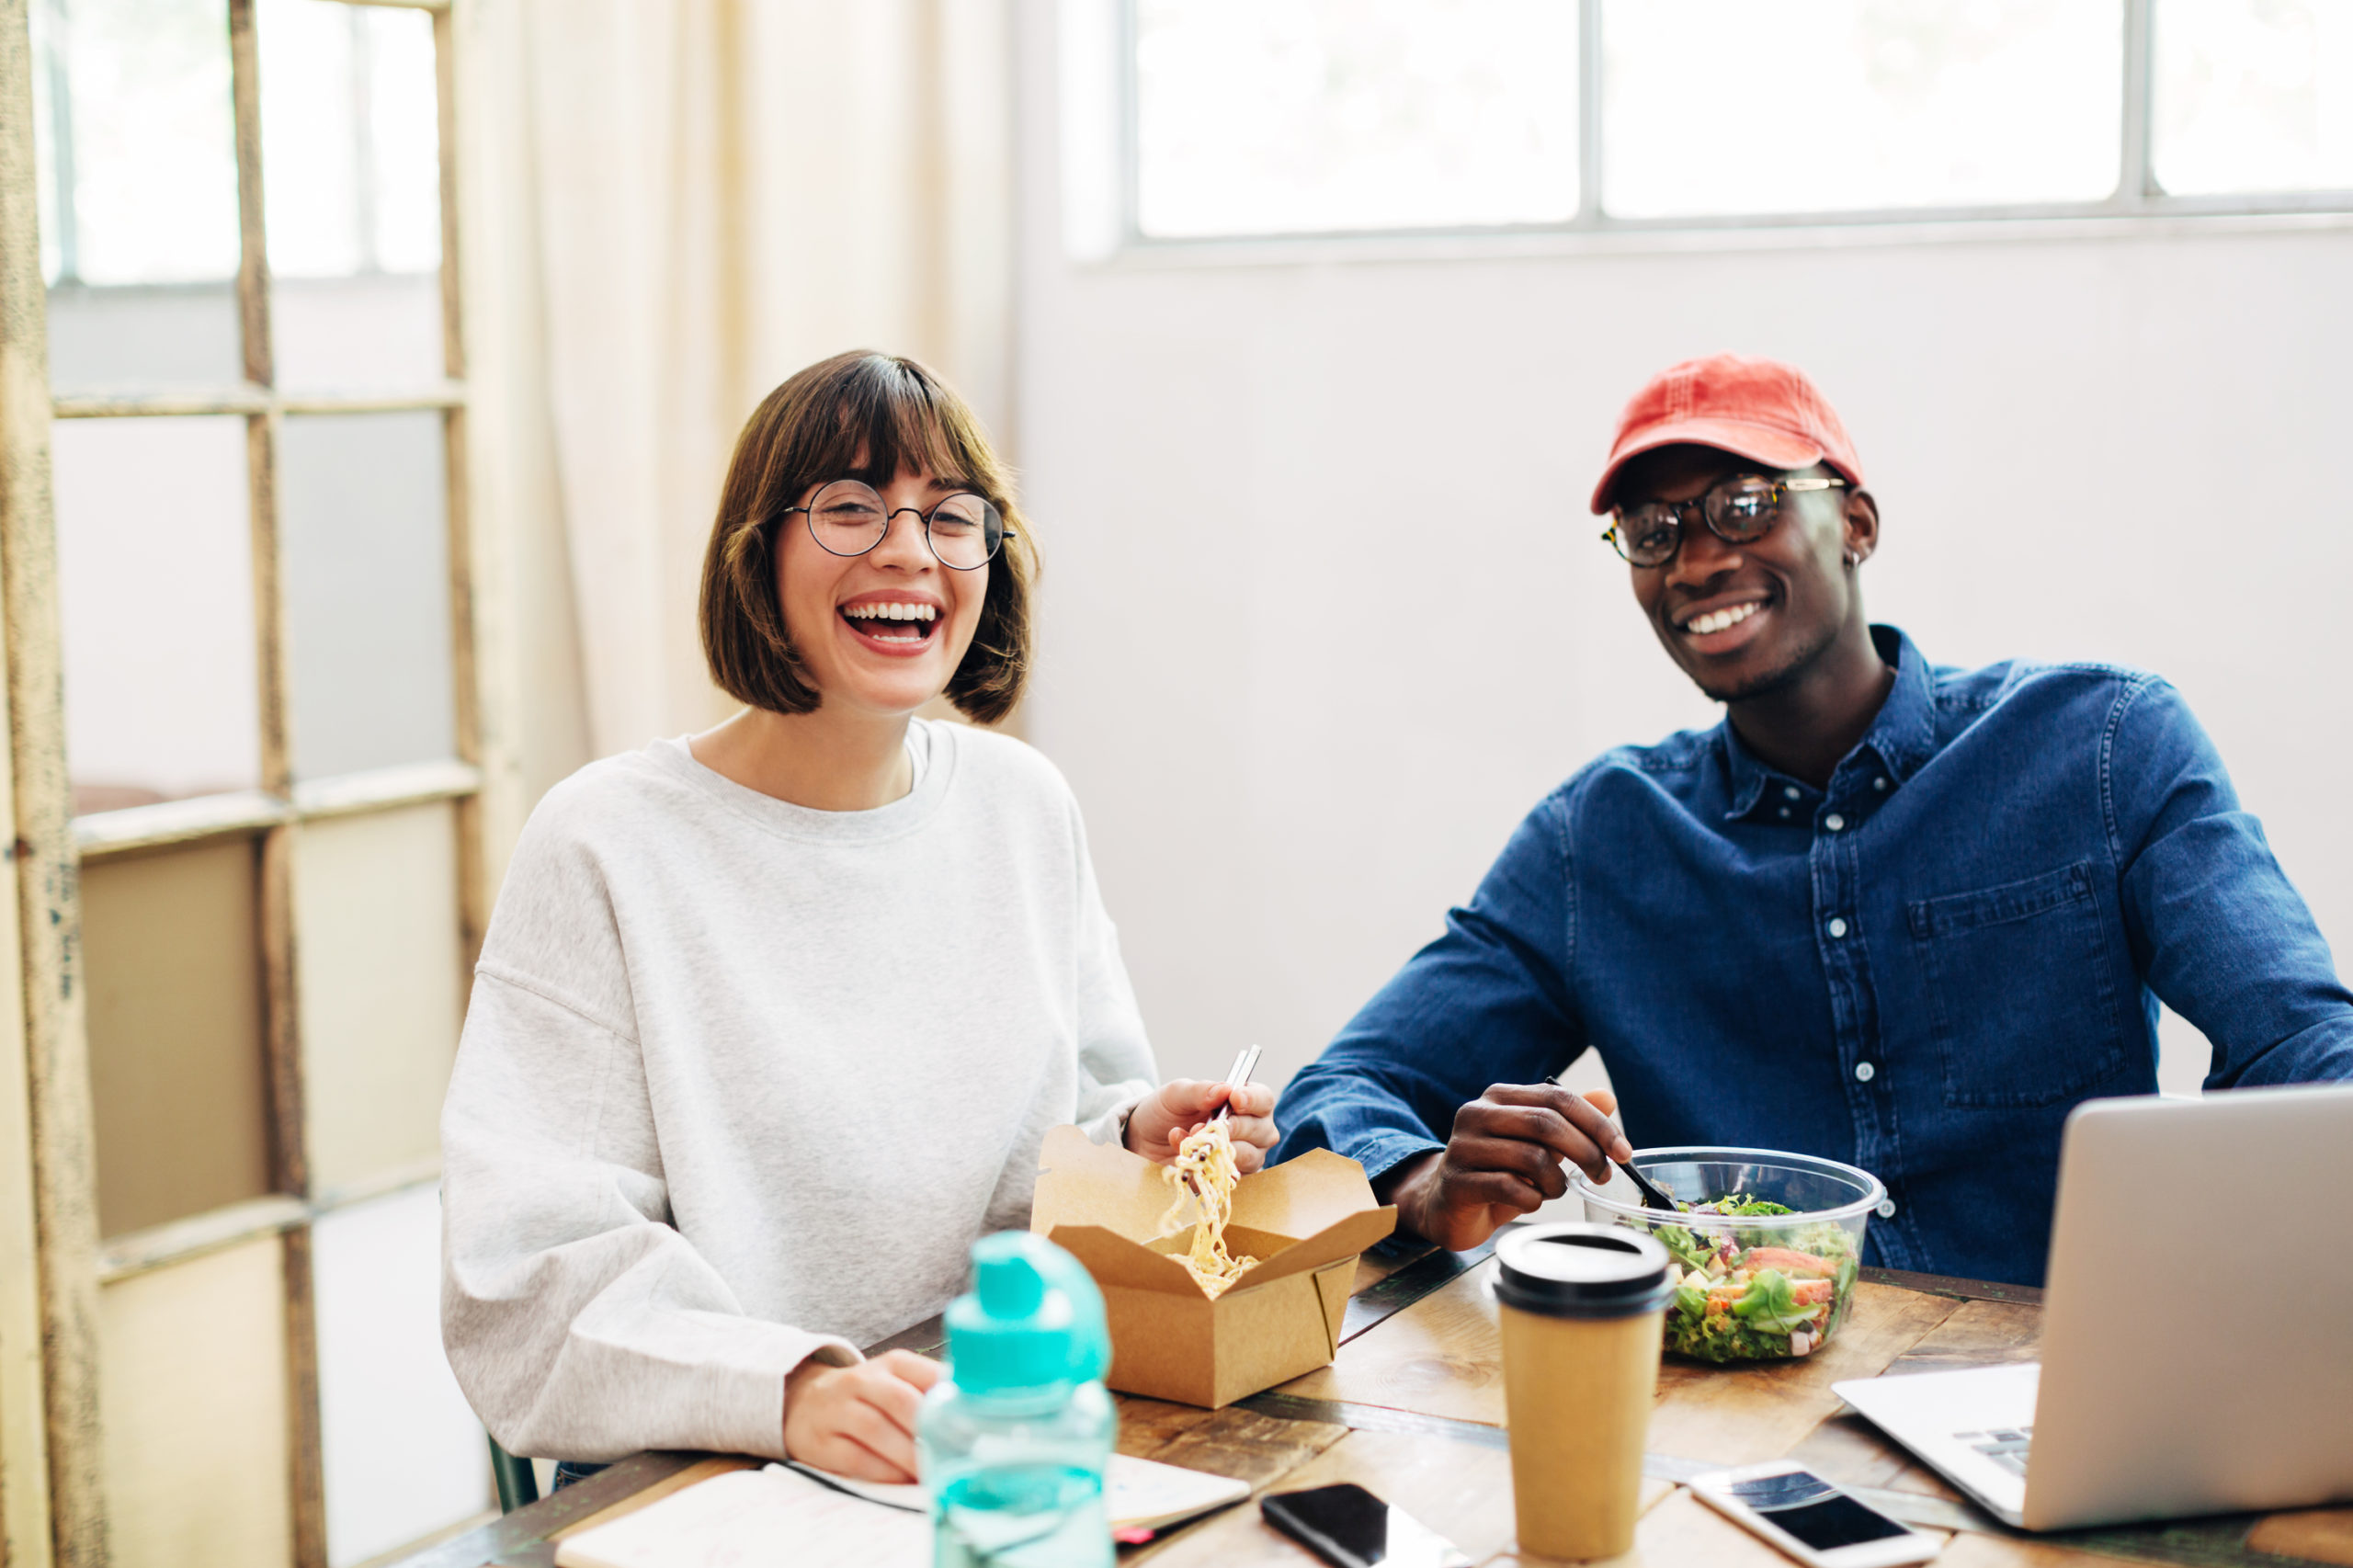 Two people laughing over a work lunch